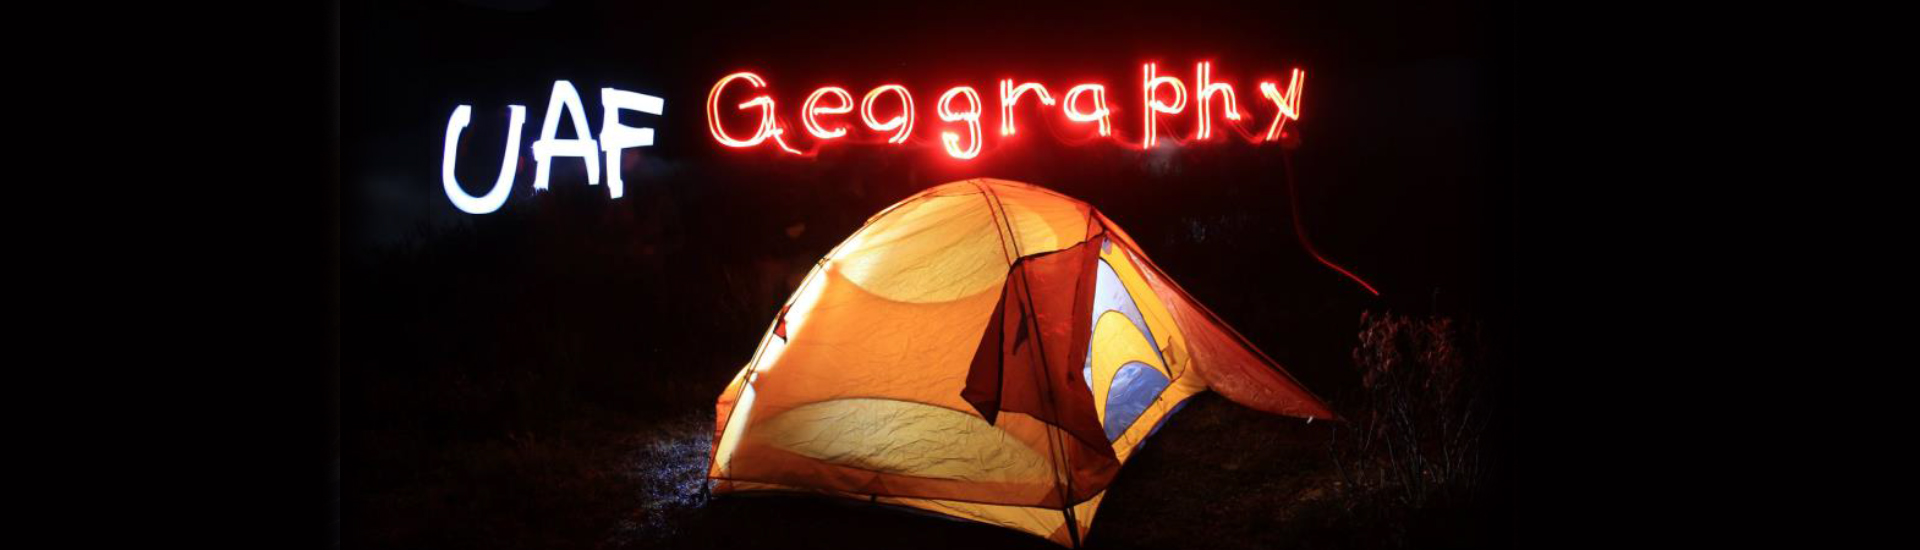 geography tent